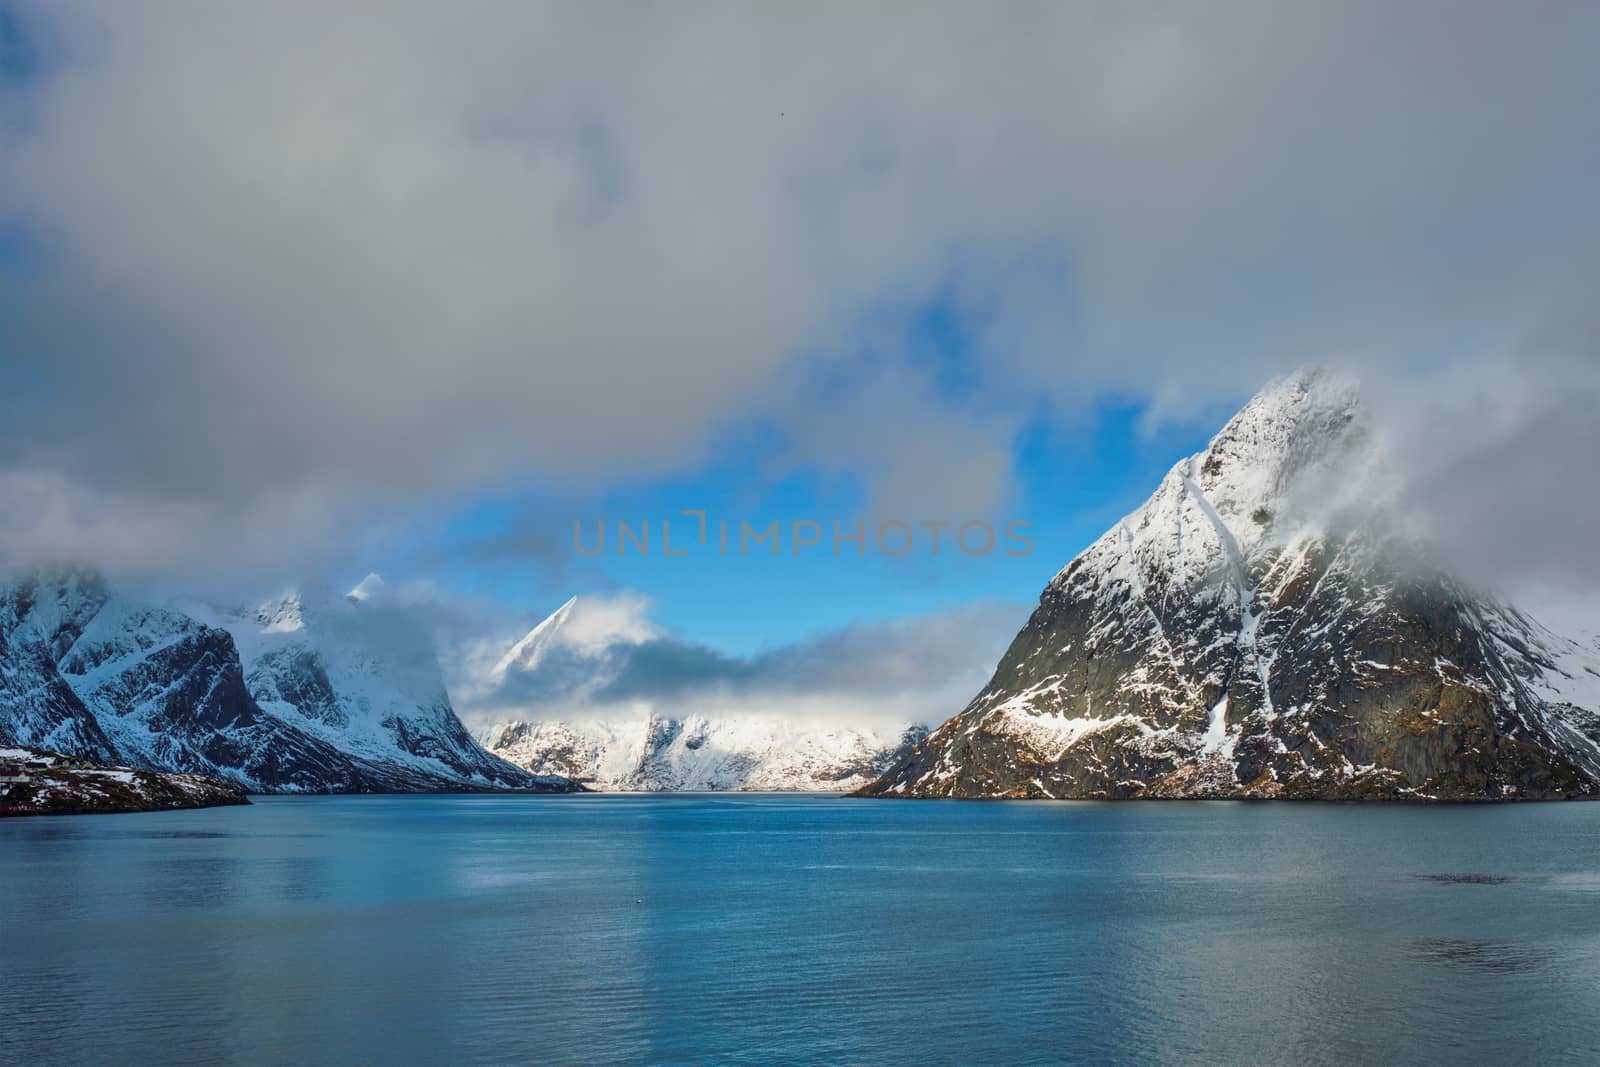 Norwegian fjord and mountains with snow in winter. Lofoten islands, Norway